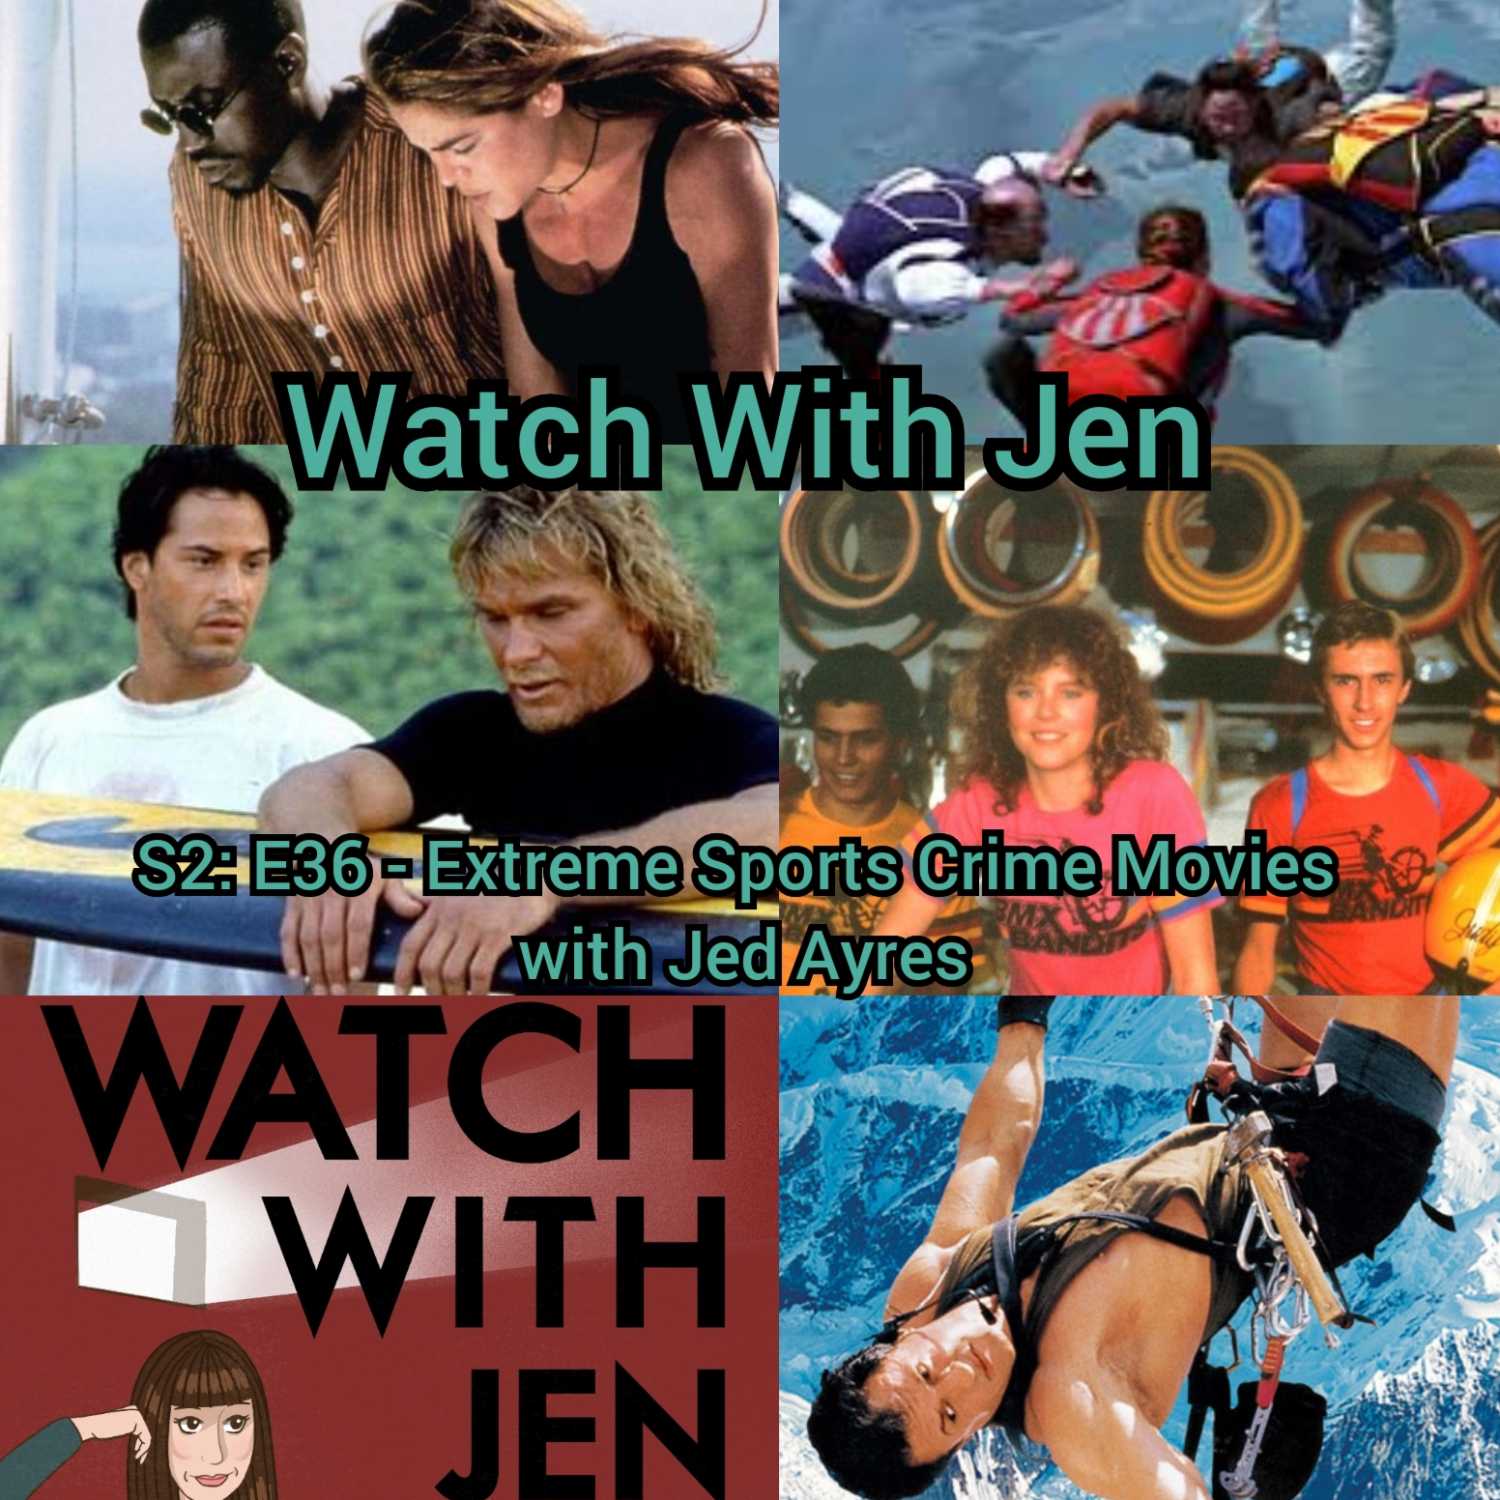 Watch With Jen - S2: E36 - Extreme Sports Crime Movies with Jed Ayres